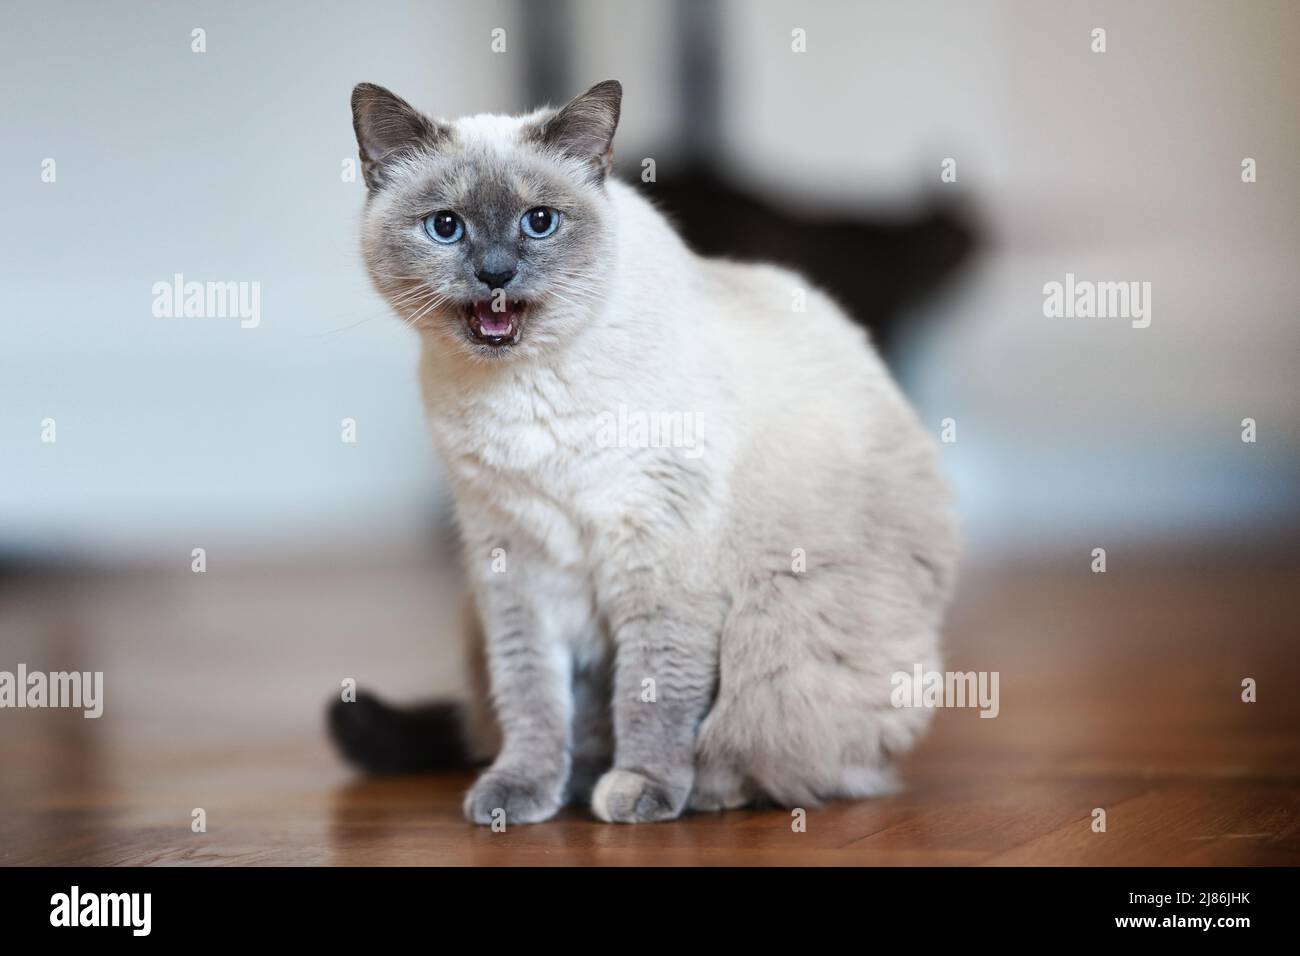 Older gray cat with piercing blue eyes, sitting on wooden floor mouth open meow, shallow depth of field photo Stock Photo